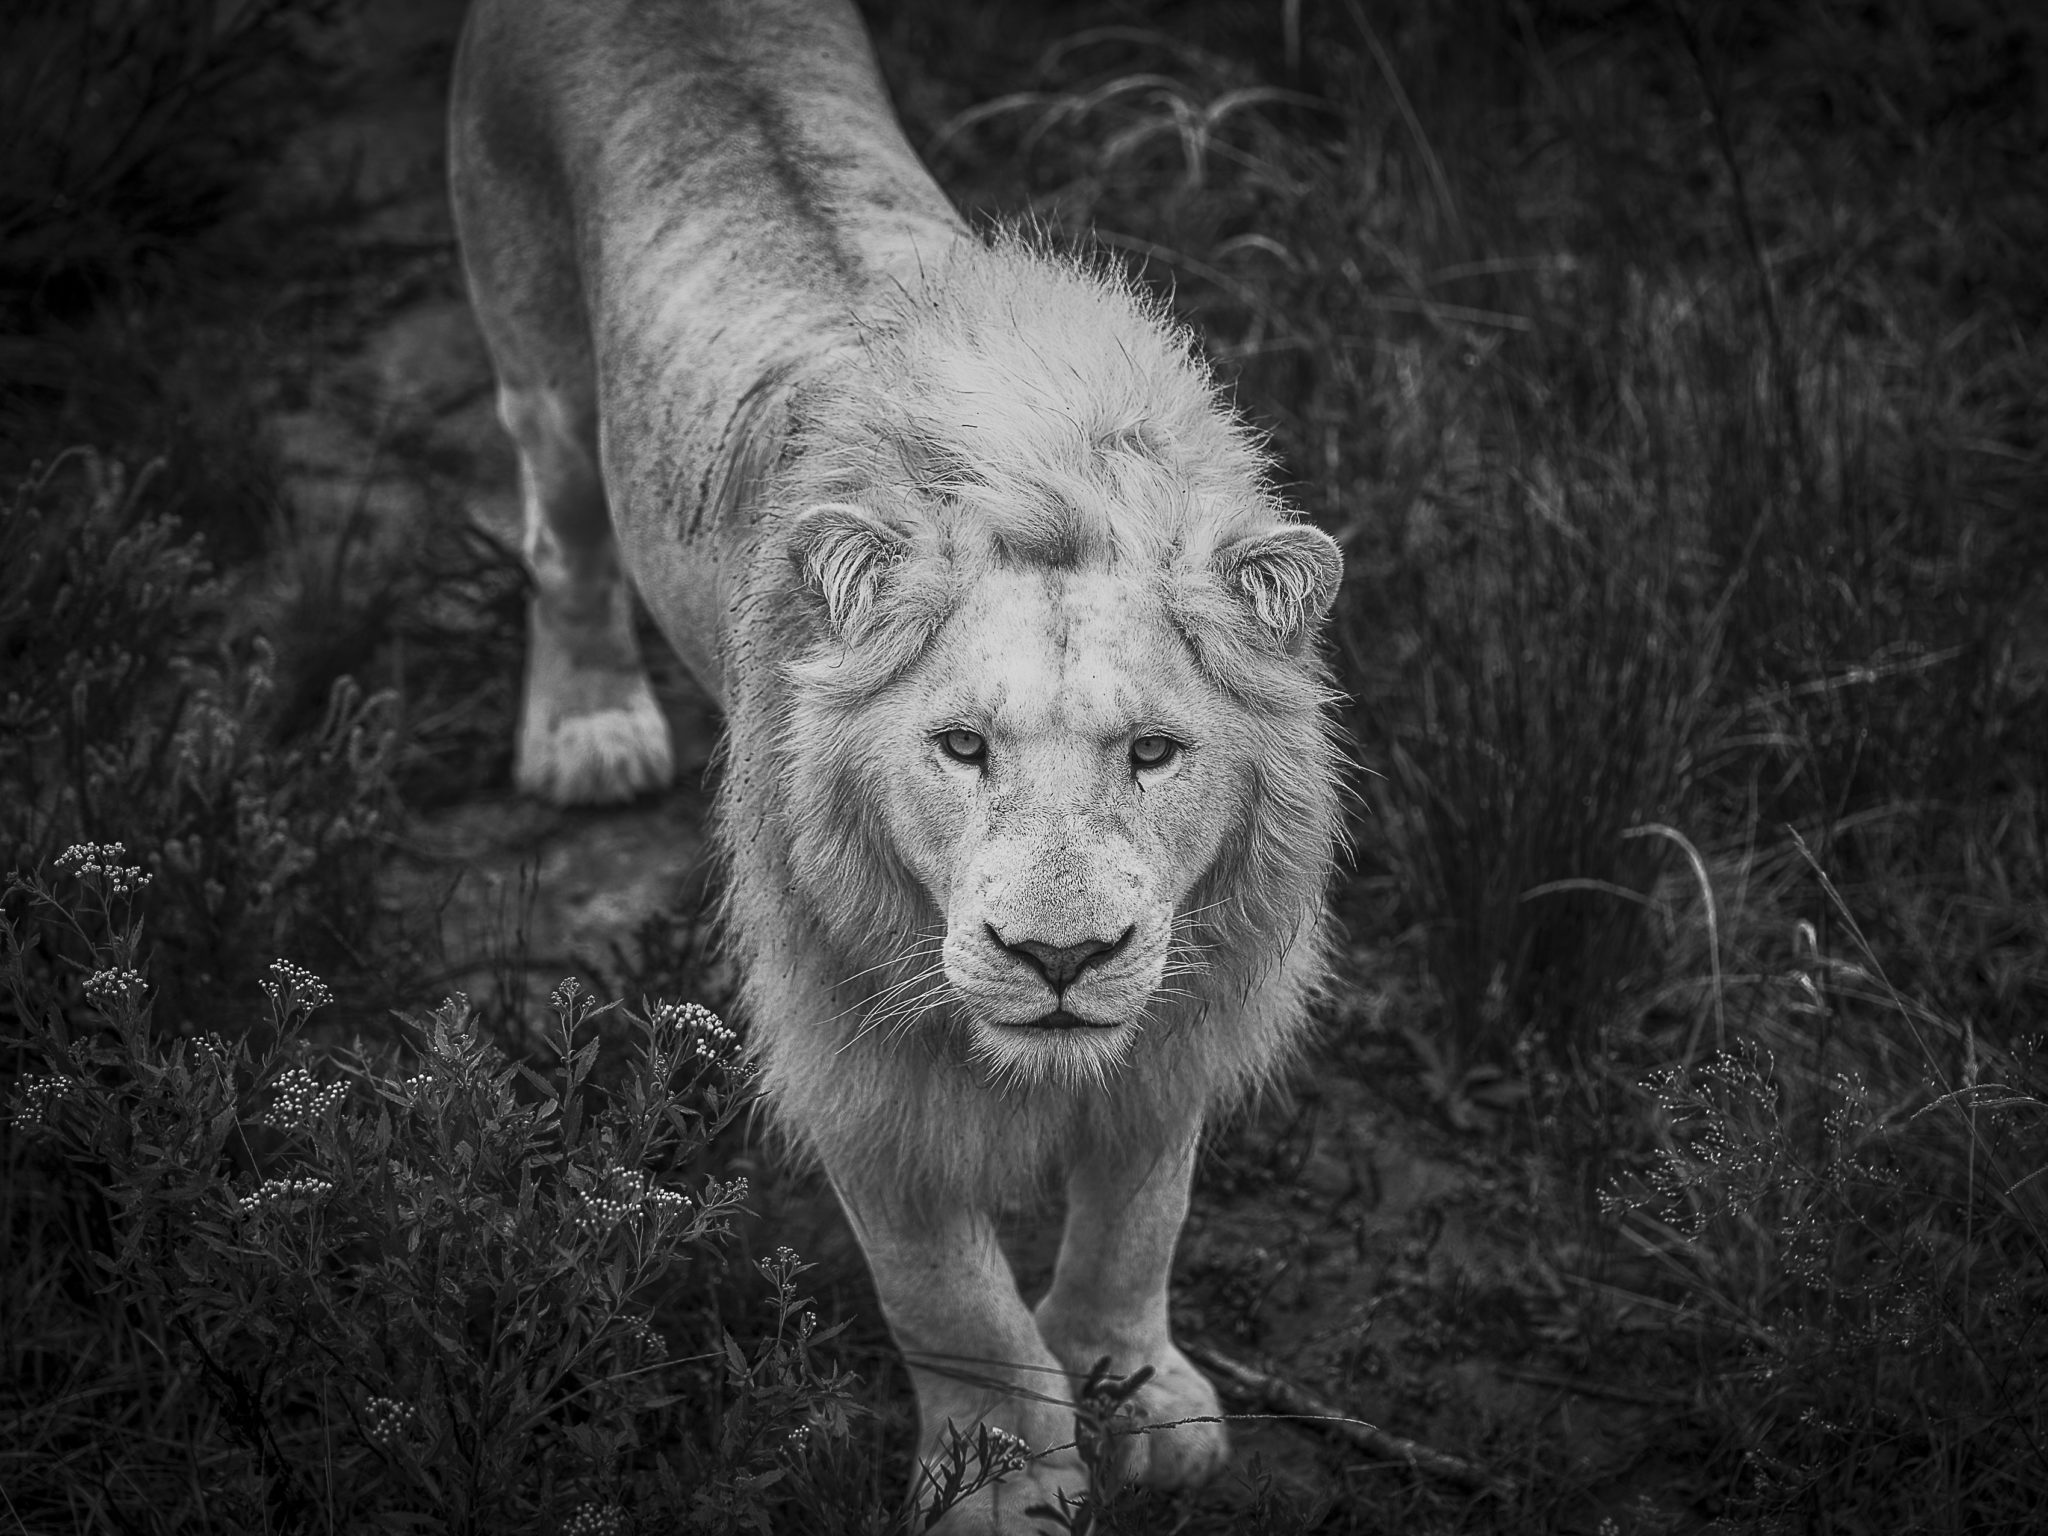 White King – South Africa